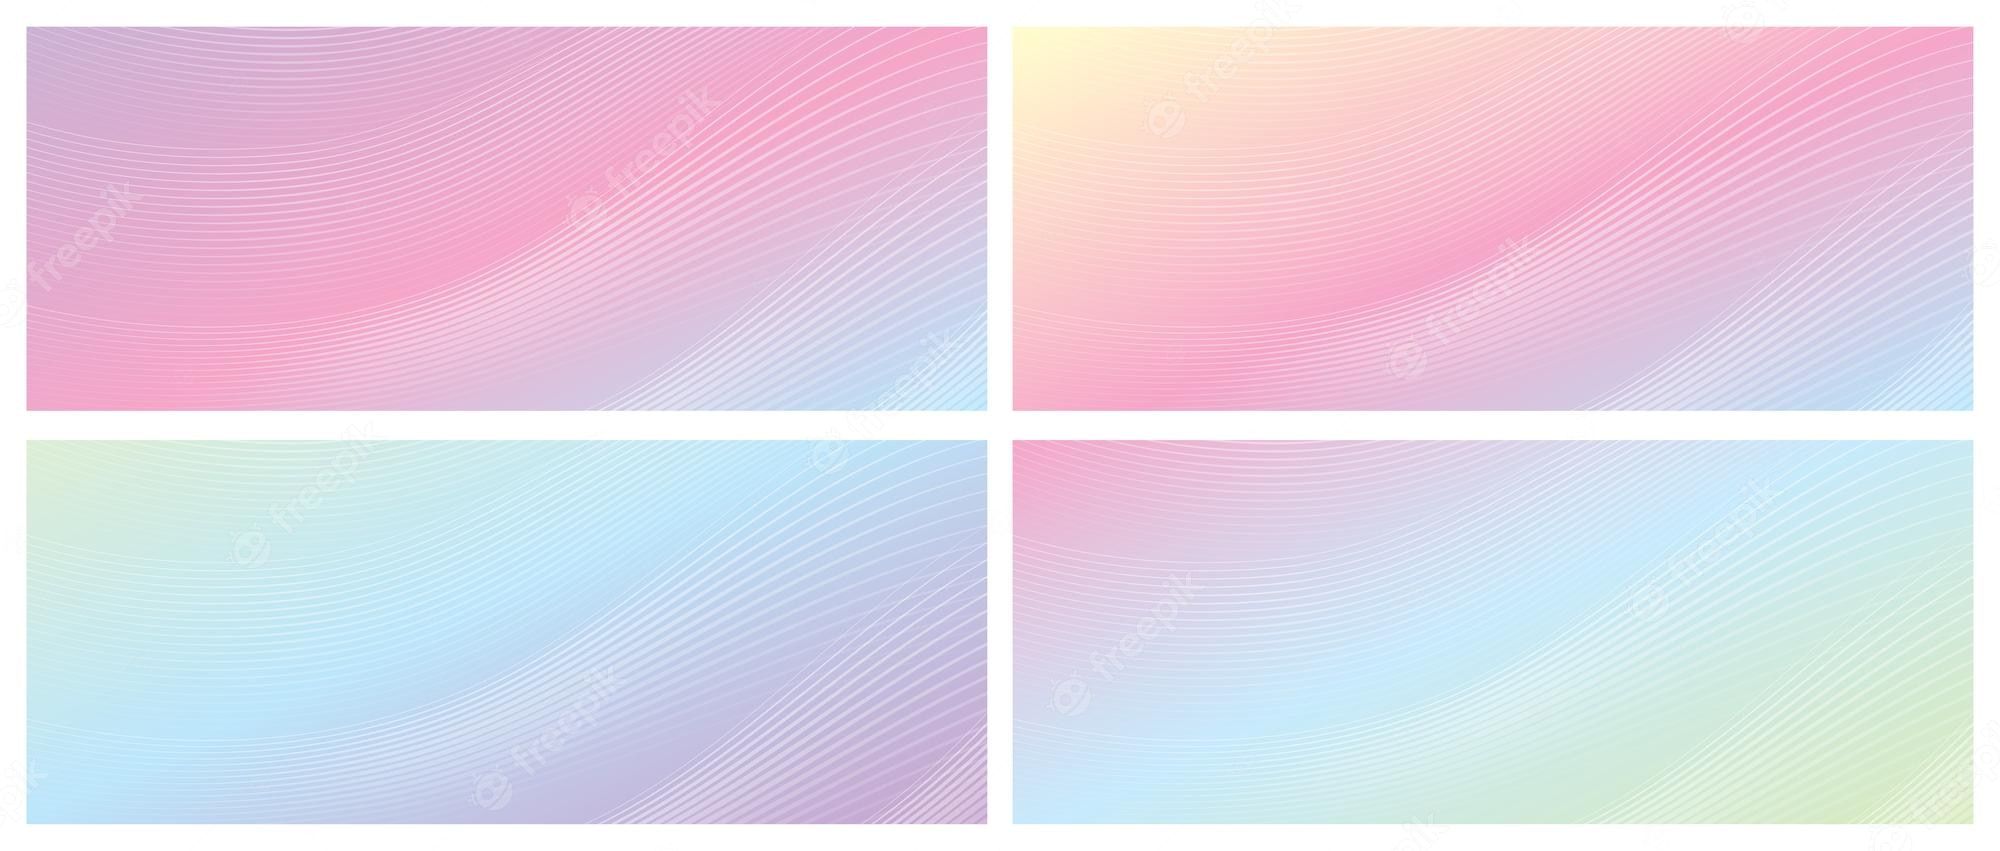 Set of abstract colorful backgrounds with a gradient of pastel colors - Pastel rainbow